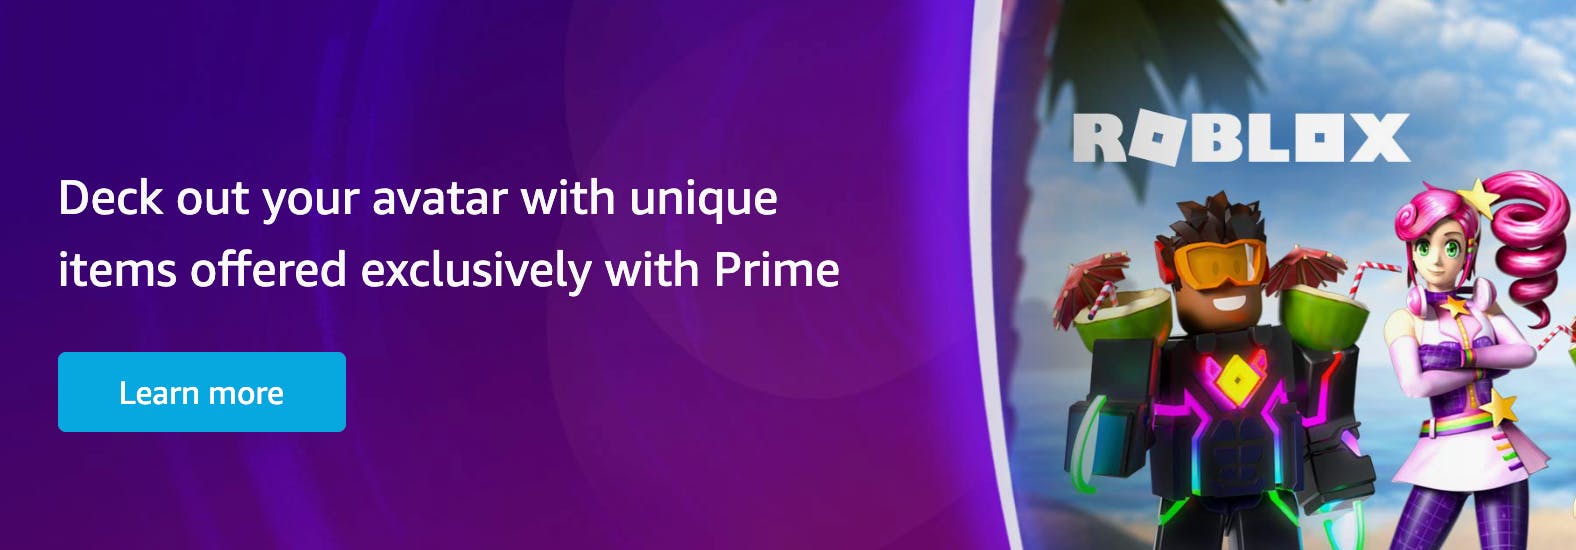 Amazon Prime Is Giving Away Free Video Games The Krazy Coupon Lady - prime gaming roblox items